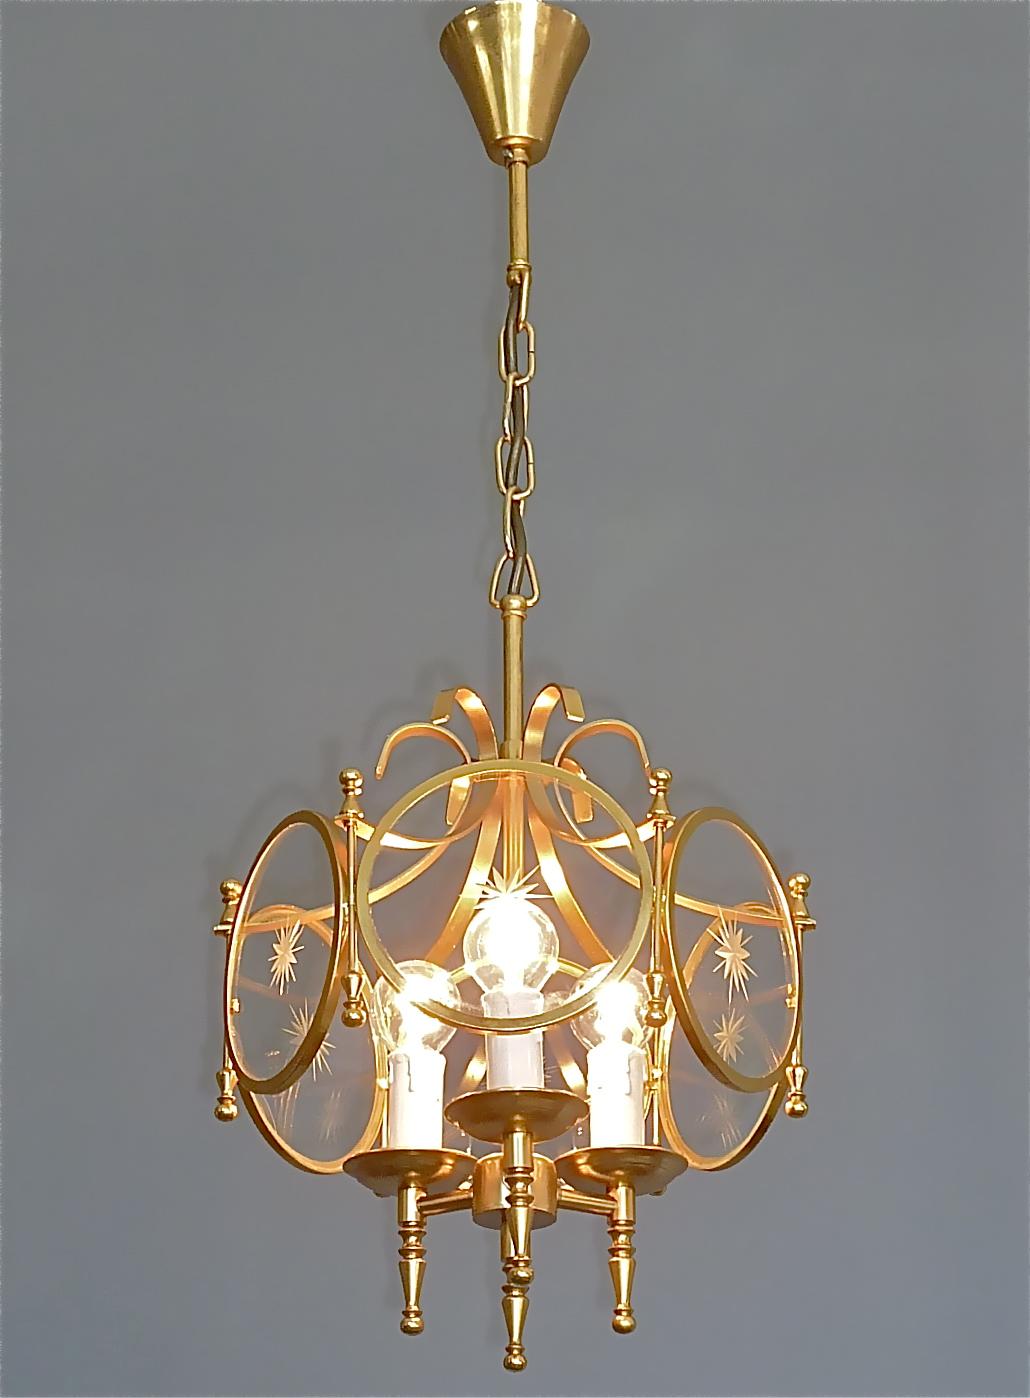 Gorgeous French midcentury gilt brass metal and crystal glass disc lantern with star motif made by Maison Jansen, France circa 1950s to 1960s. The fabulous of vintage pendant lamp takes three E14 standard screw bulbs to illuminate. Wiring is very